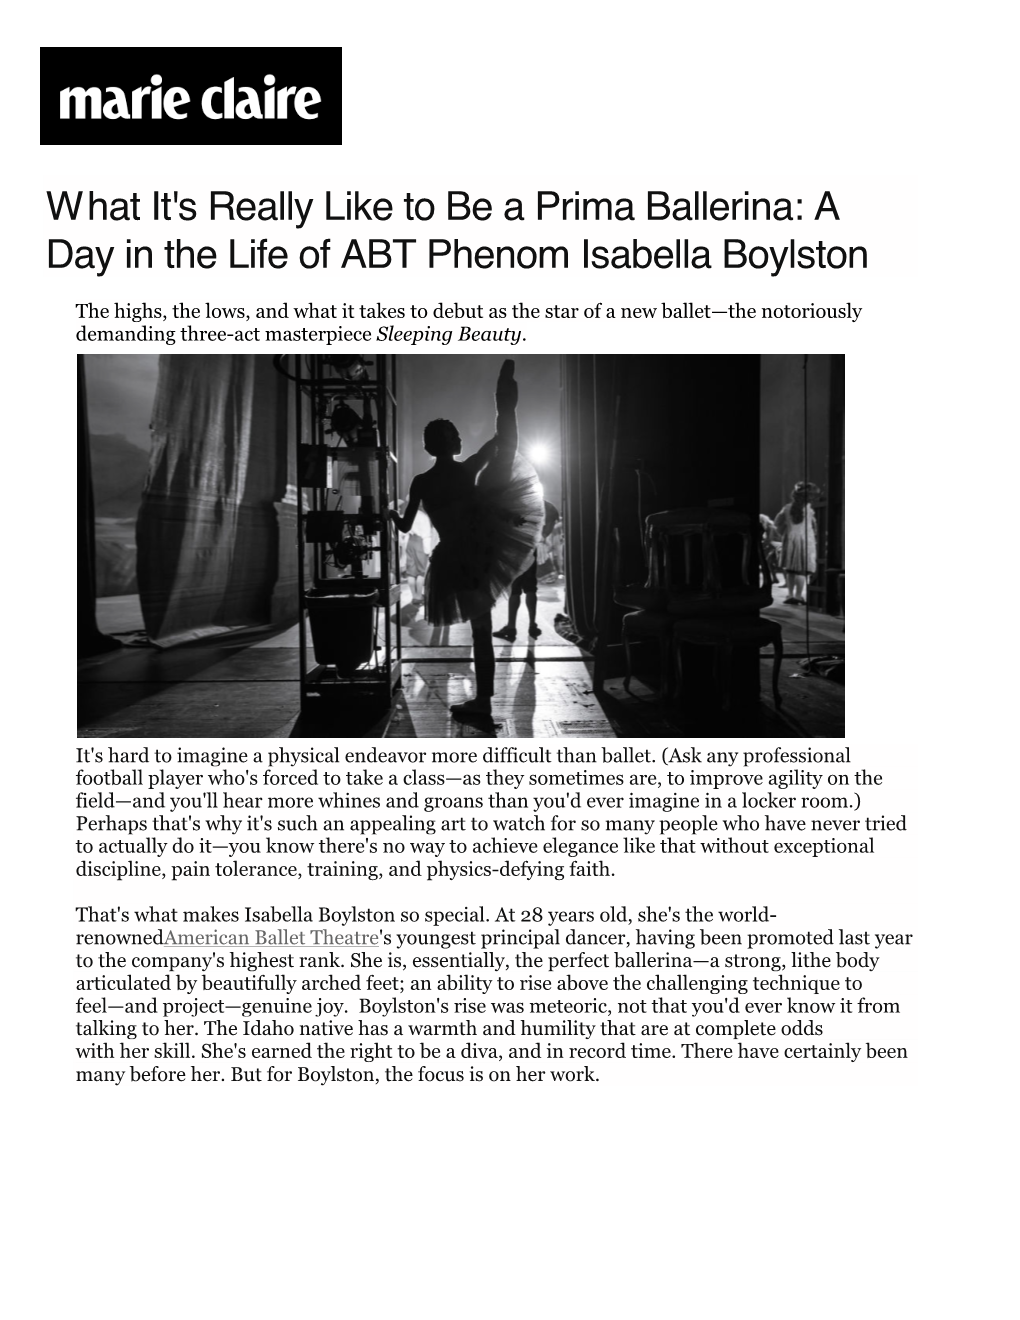 W Hat It's Really Like to Be a Prima Ballerina: a Day in the Life of ABT Phenom Isabella Boylston